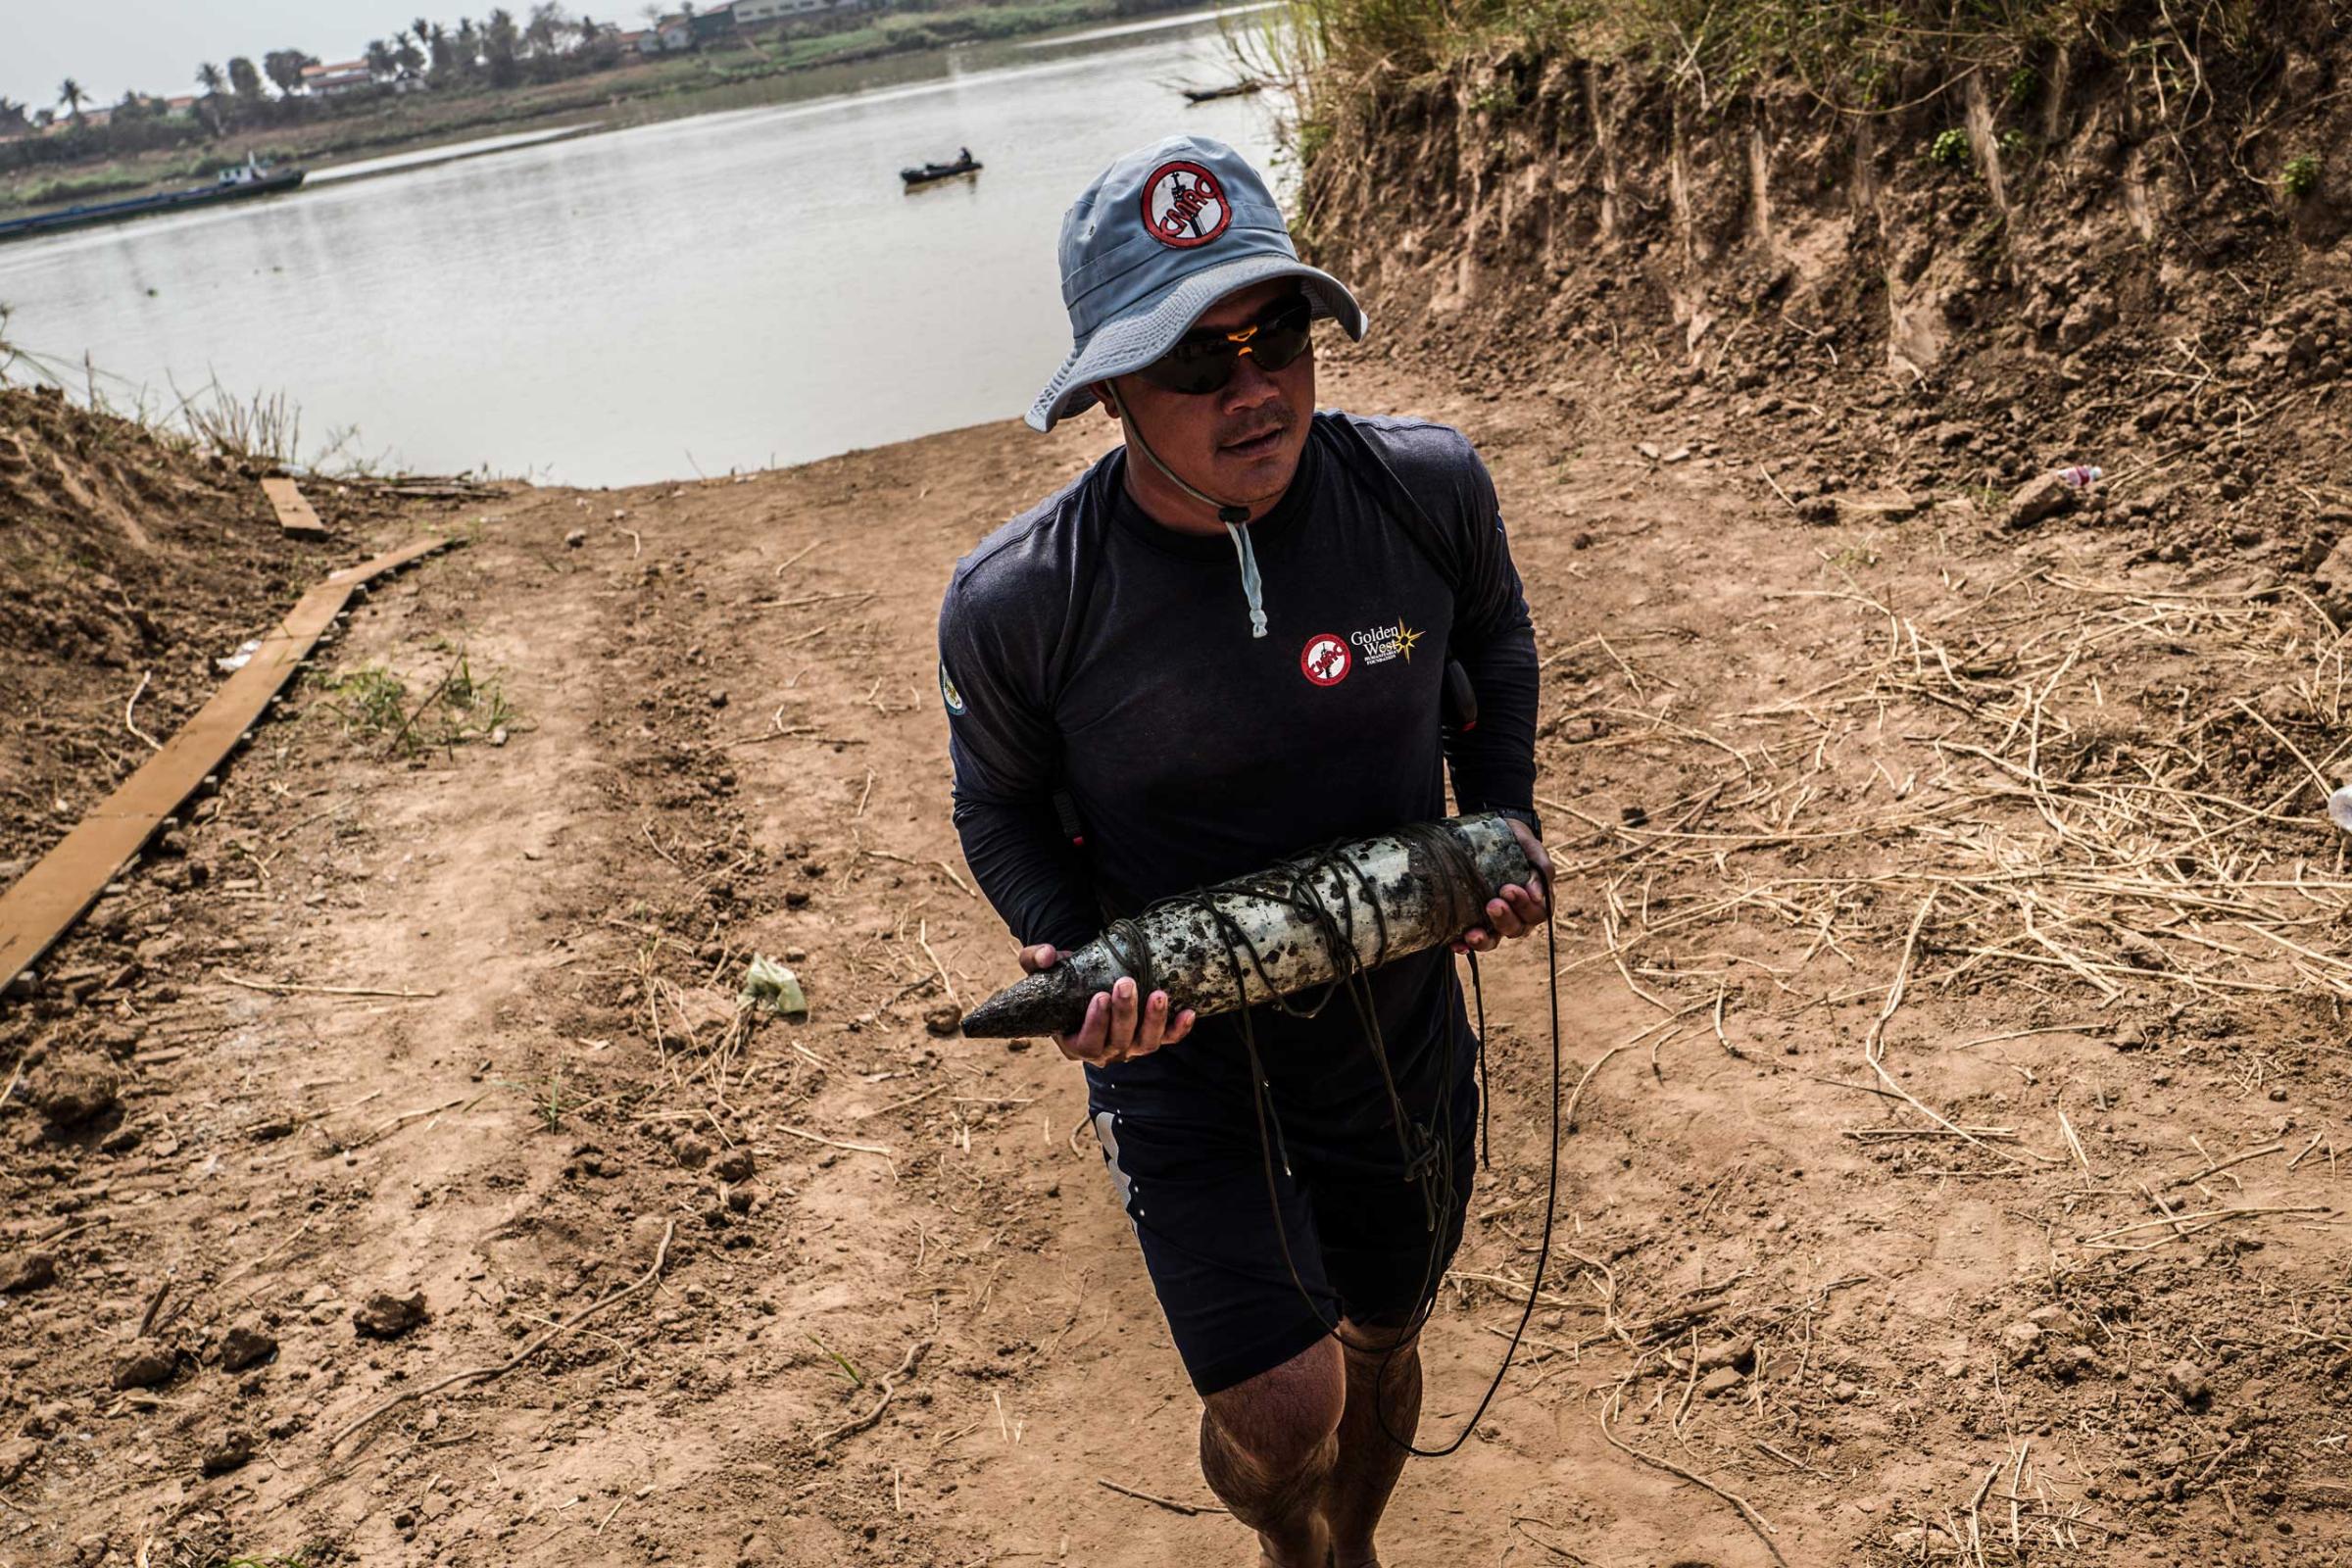 Team Leader Sok Chenda carries a 105mm round from the banks of the Tonle Sap River in March 2016. The team was informed of the round whilst conducting reconnaissance in the area.